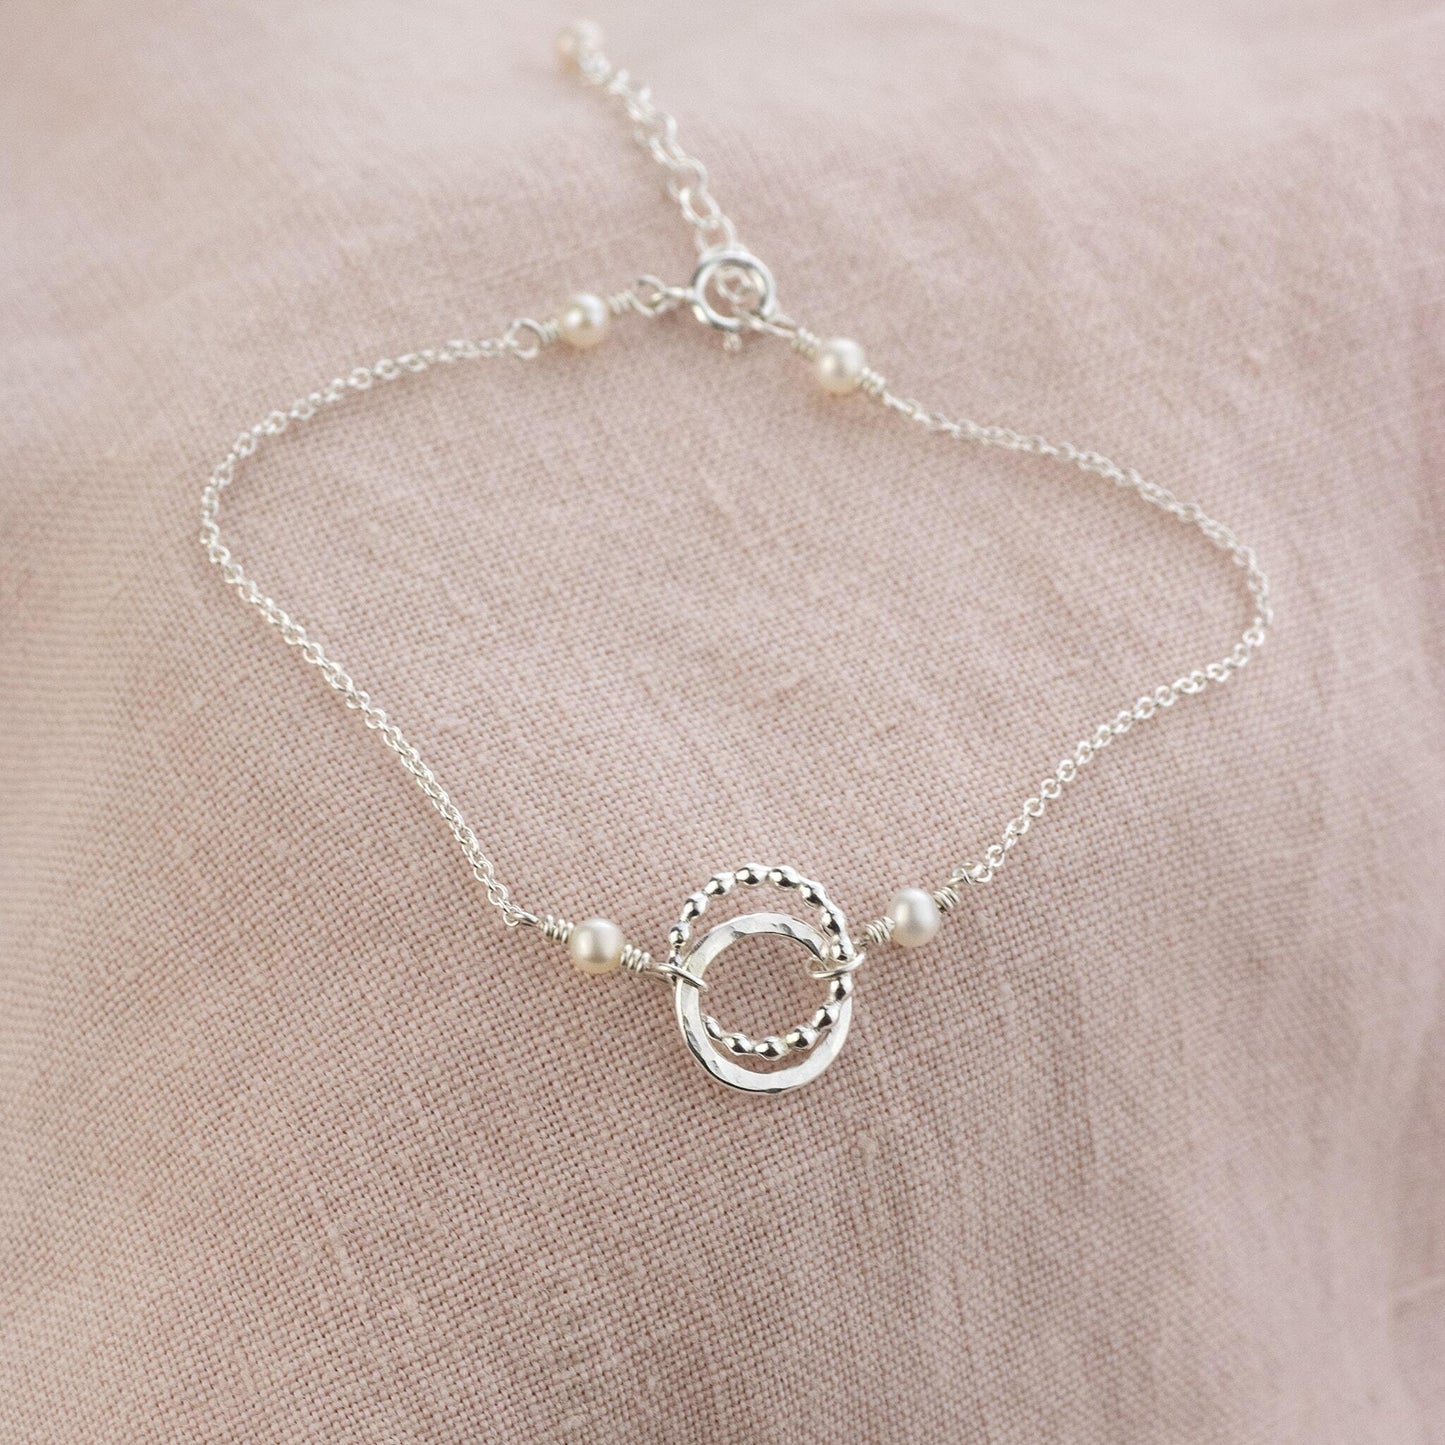 Gift for Sister & Bridesmaid - Love Knot Bracelet - Linked for a Lifetime - Silver